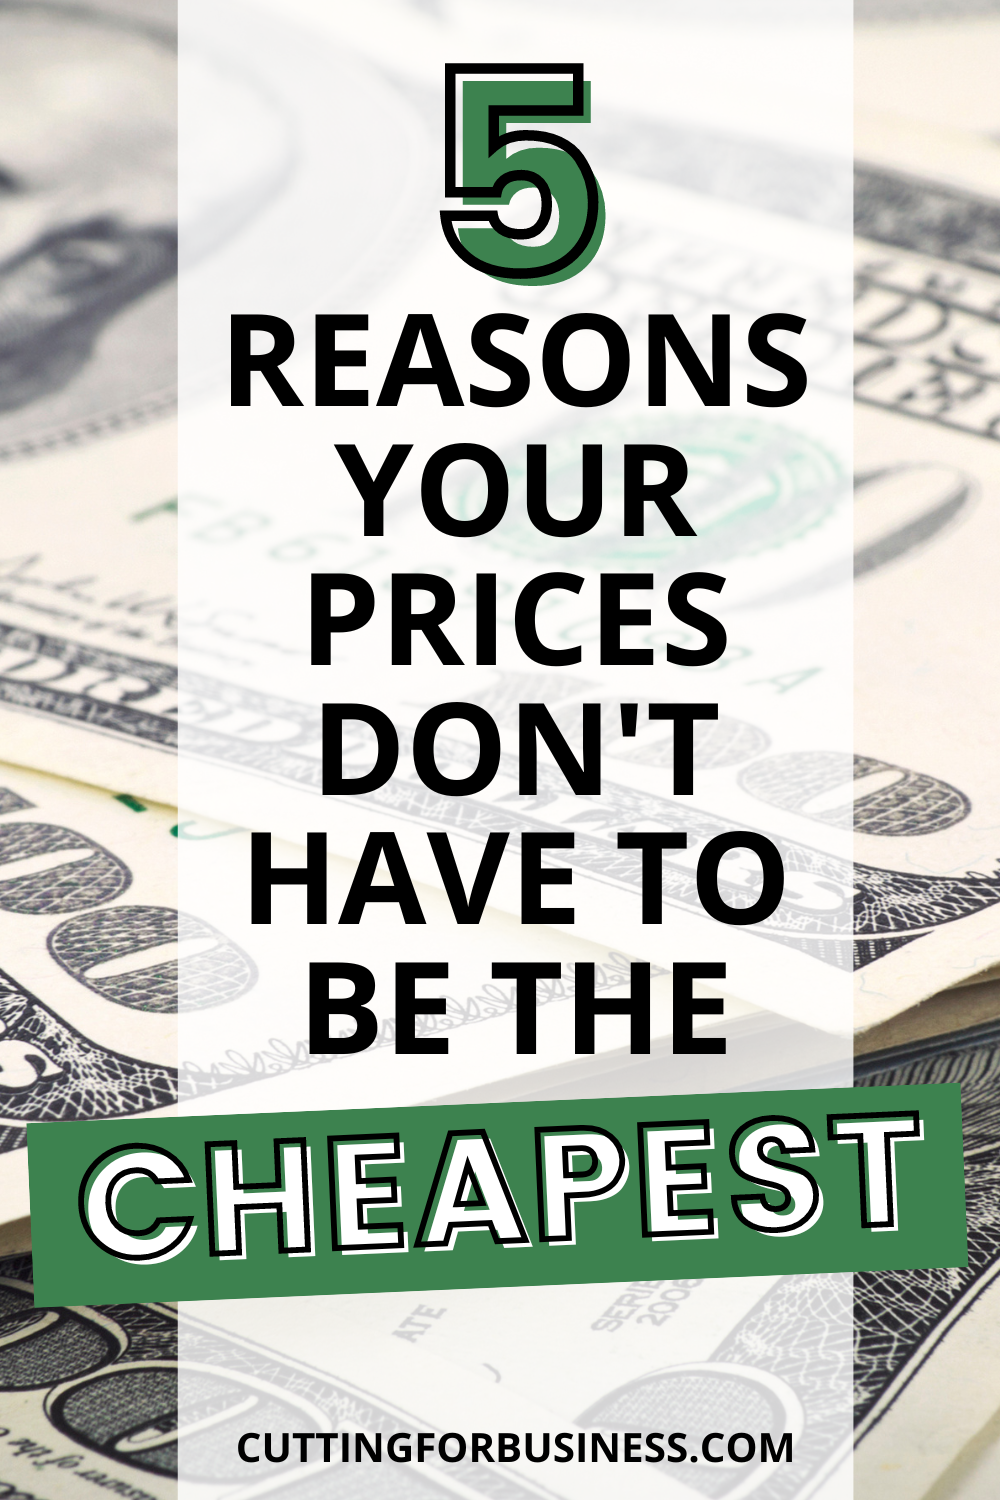 Reasons Your Prices Don't Have to be the Cheapest - cuttingforbusiness.com.